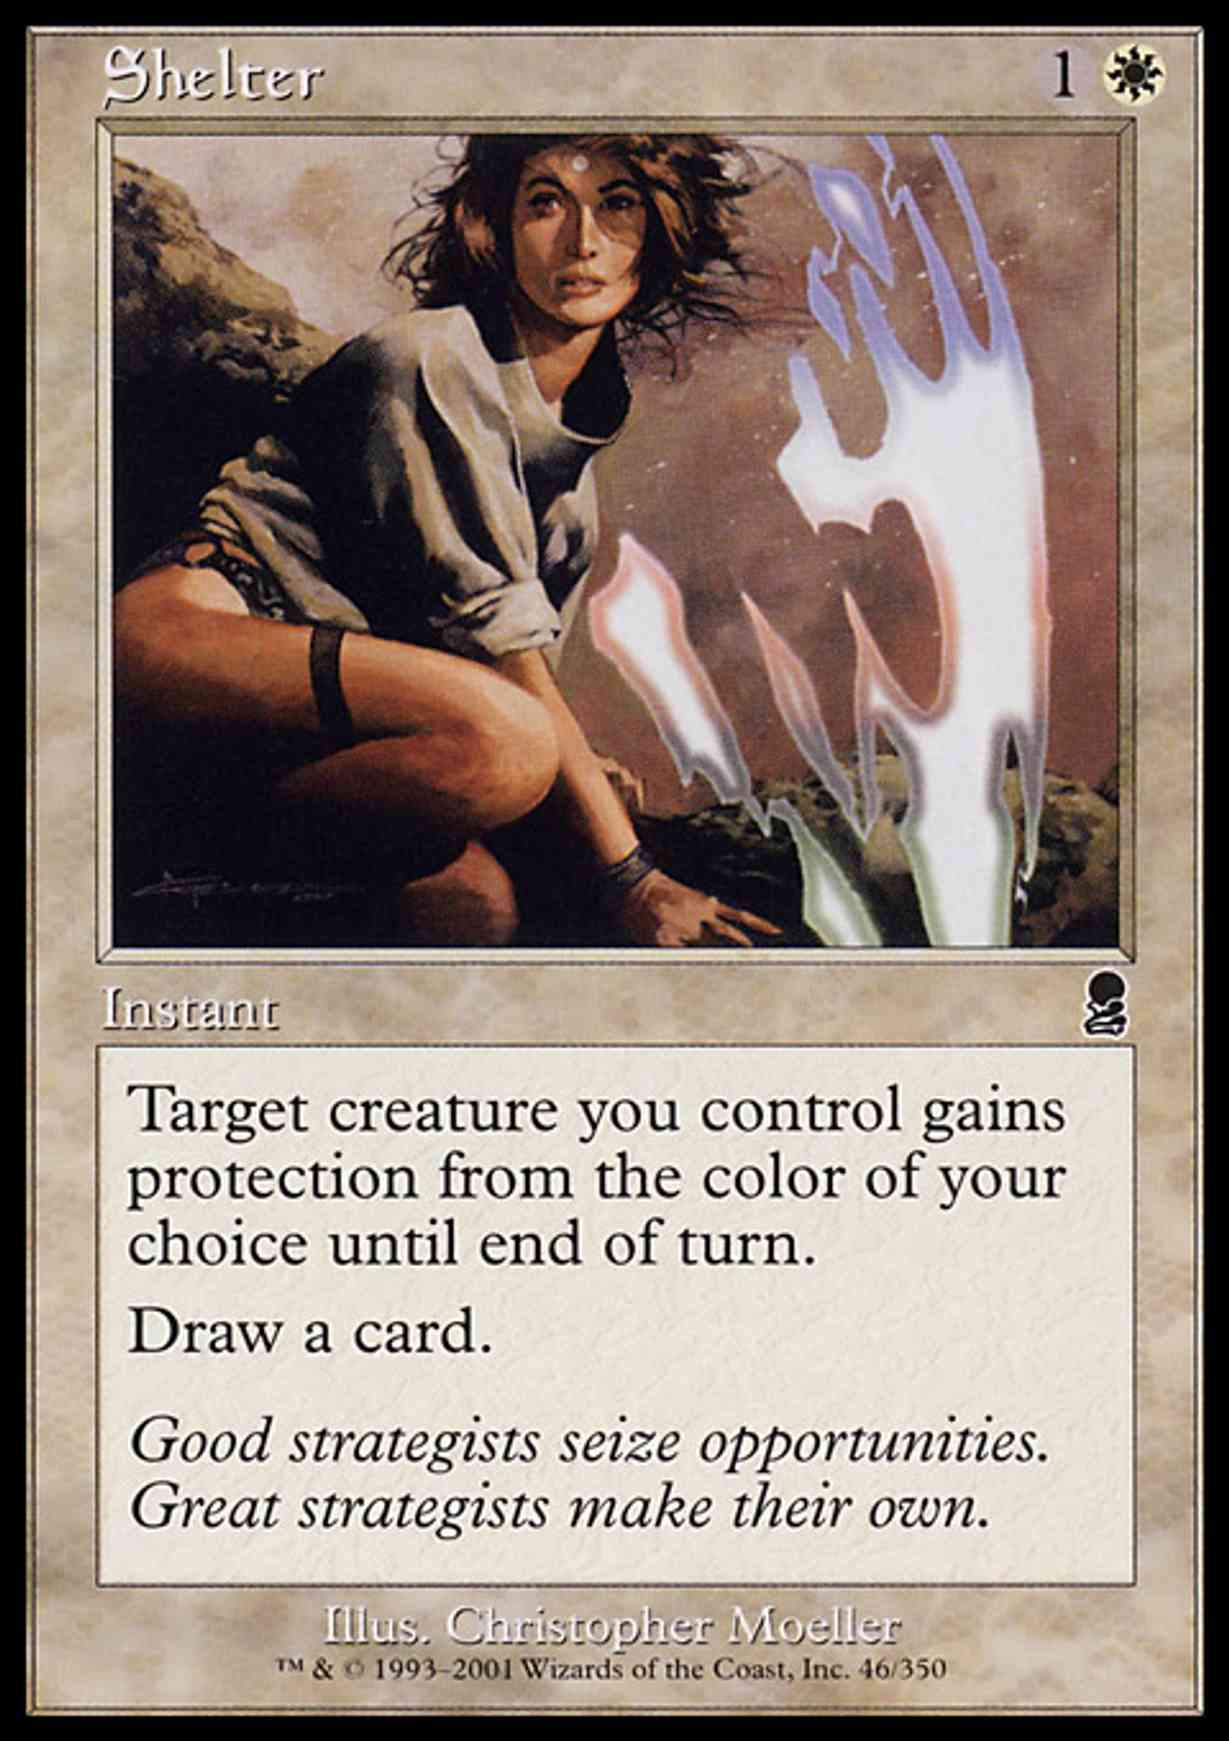 Shelter magic card front